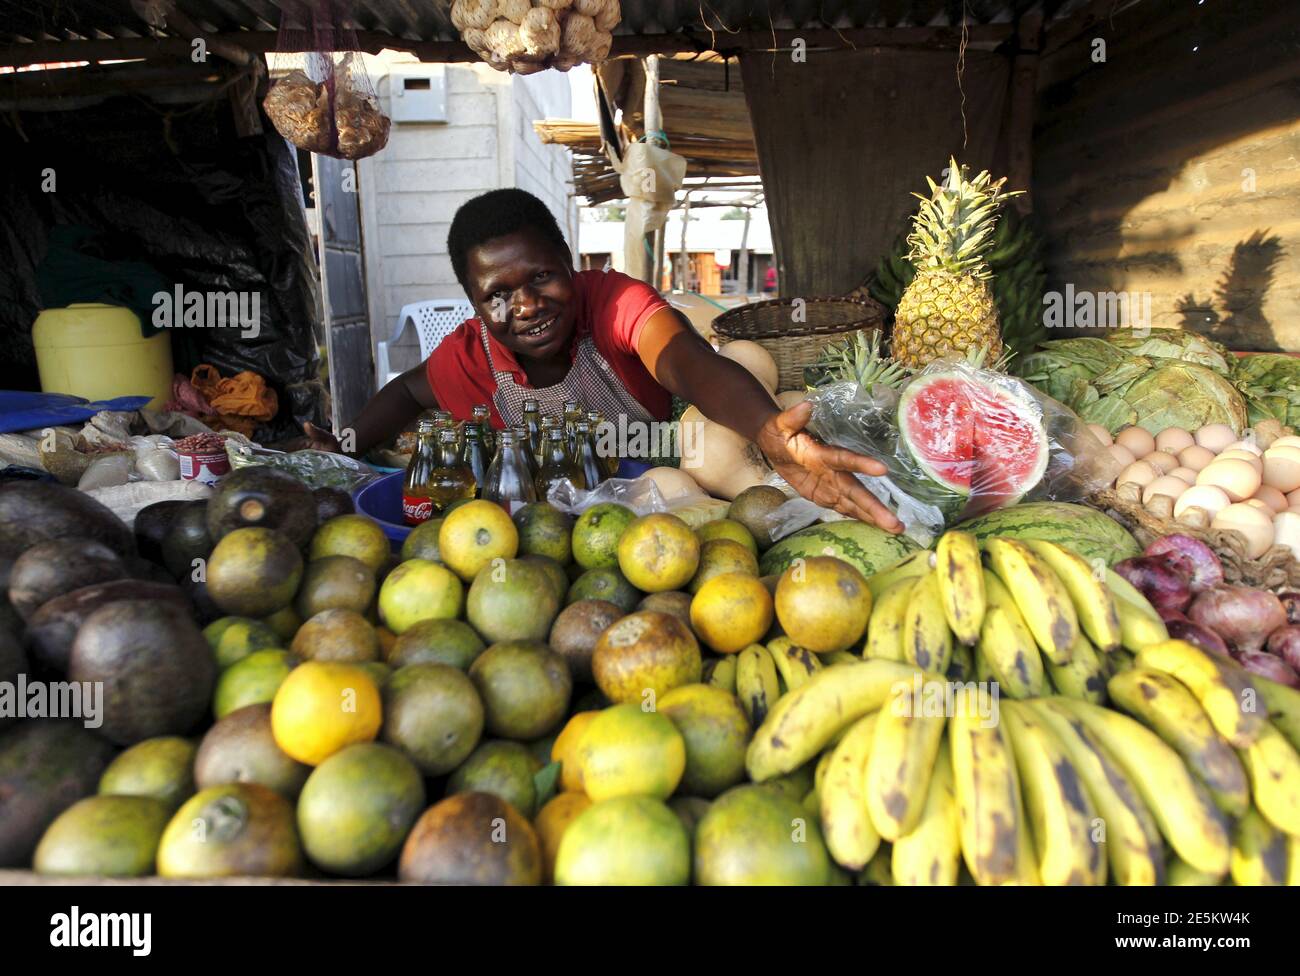 Imelda Akinyi, 25, arranges fruits at her stall in the trading centre of Kogelo, west of Kenya's capital Nairobi, July 14, 2015. Akinyi said, 'President Obama is our son, he clearly knows his roots and he identifies himself with us.' 'We want him to help us get a modern supermarket in Kogelo and find markets for our fruit and vegetables overseas,' she added. As U.S. President Barack Obama visits Kenya, a personal connection to his father's birthplace of Kogelo dominates a trip that Kenyans view as a native son returning home. Residents from a herdsman to a housewife share their views on what O Stock Photo